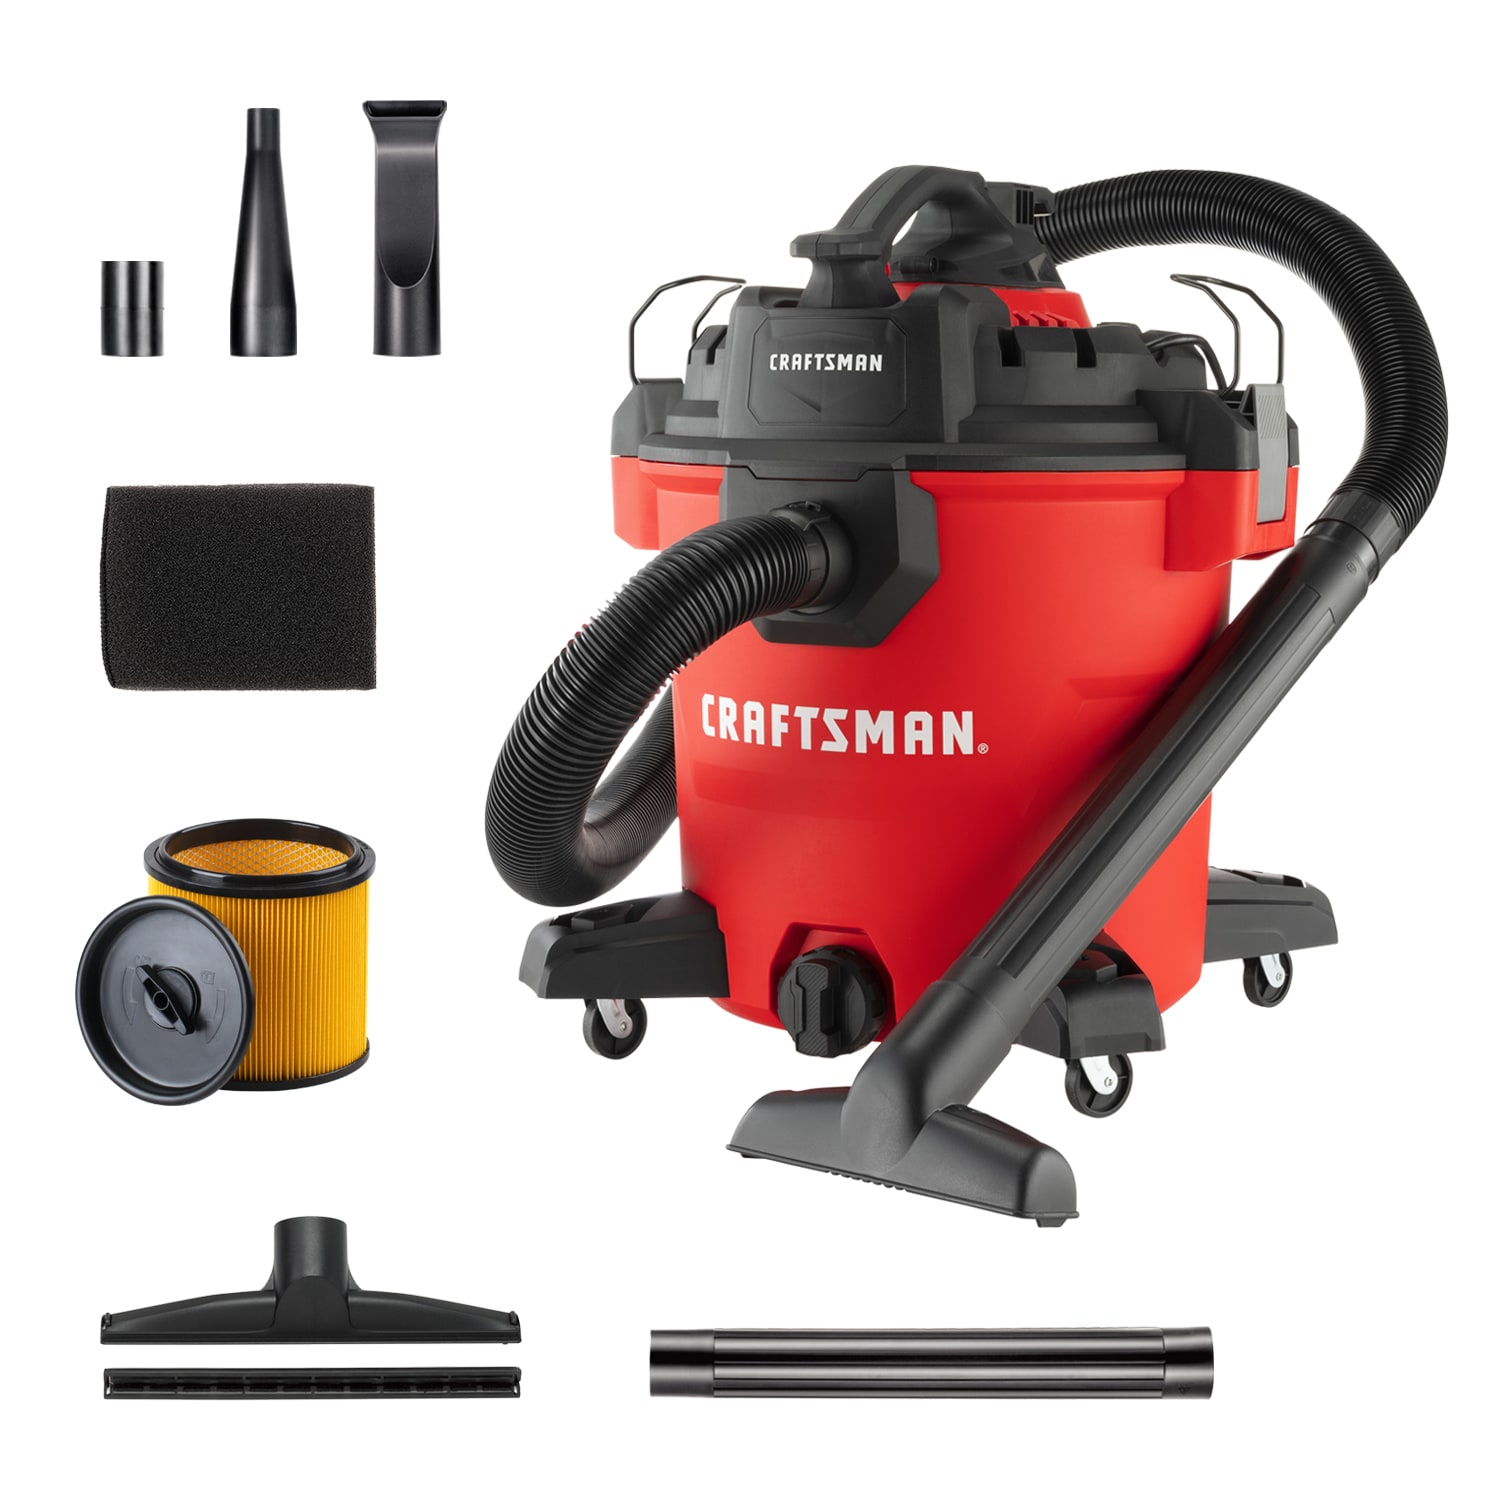 CRAFTSMAN Detachable Blower 12-Gallons 6-HP Corded Wet/Dry Shop